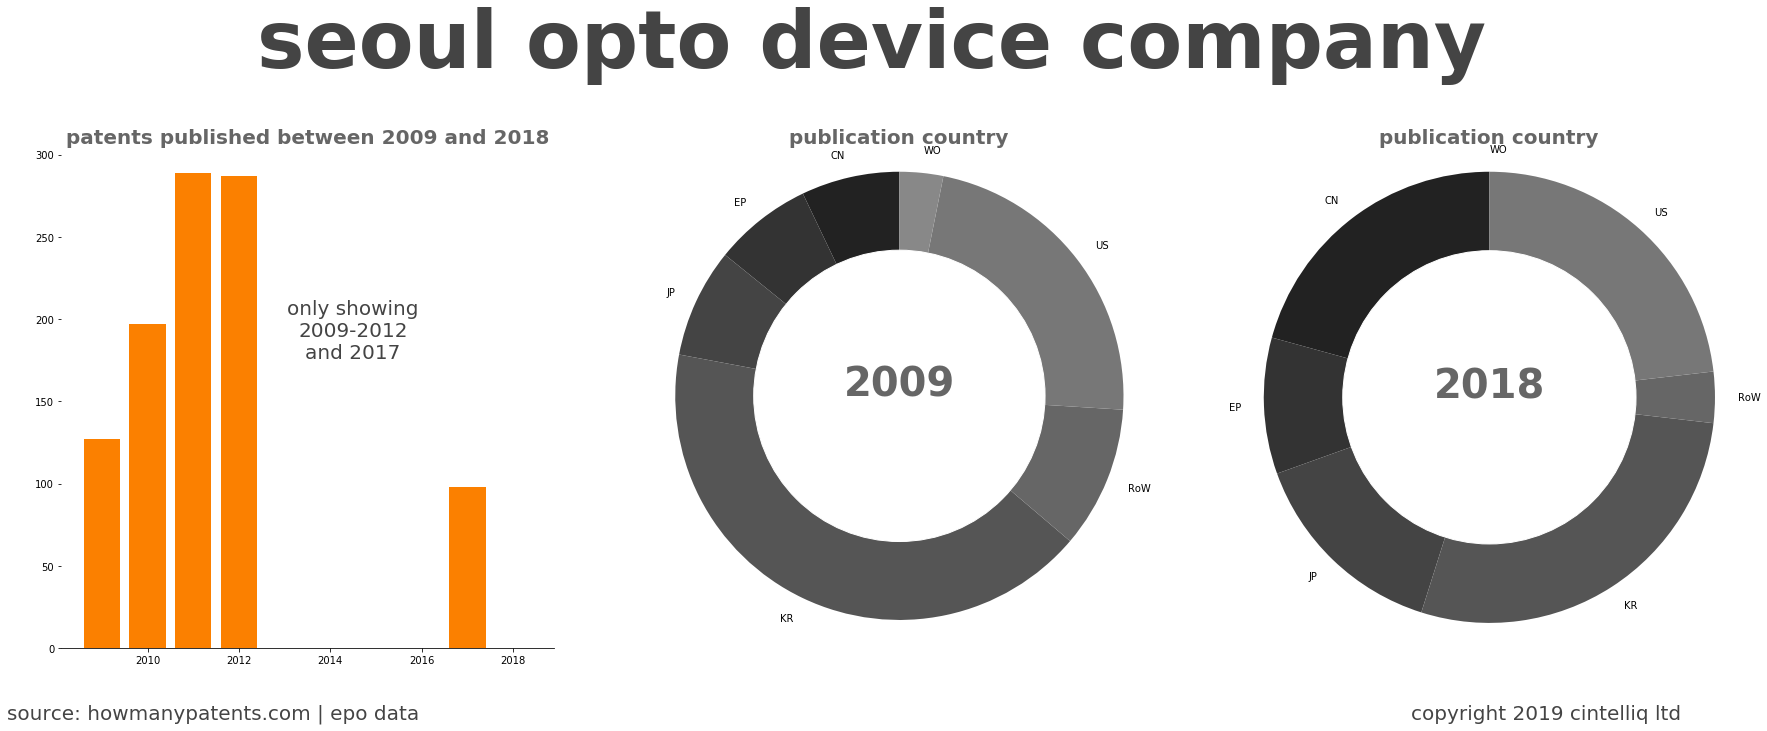 summary of patents for Seoul Opto Device Company